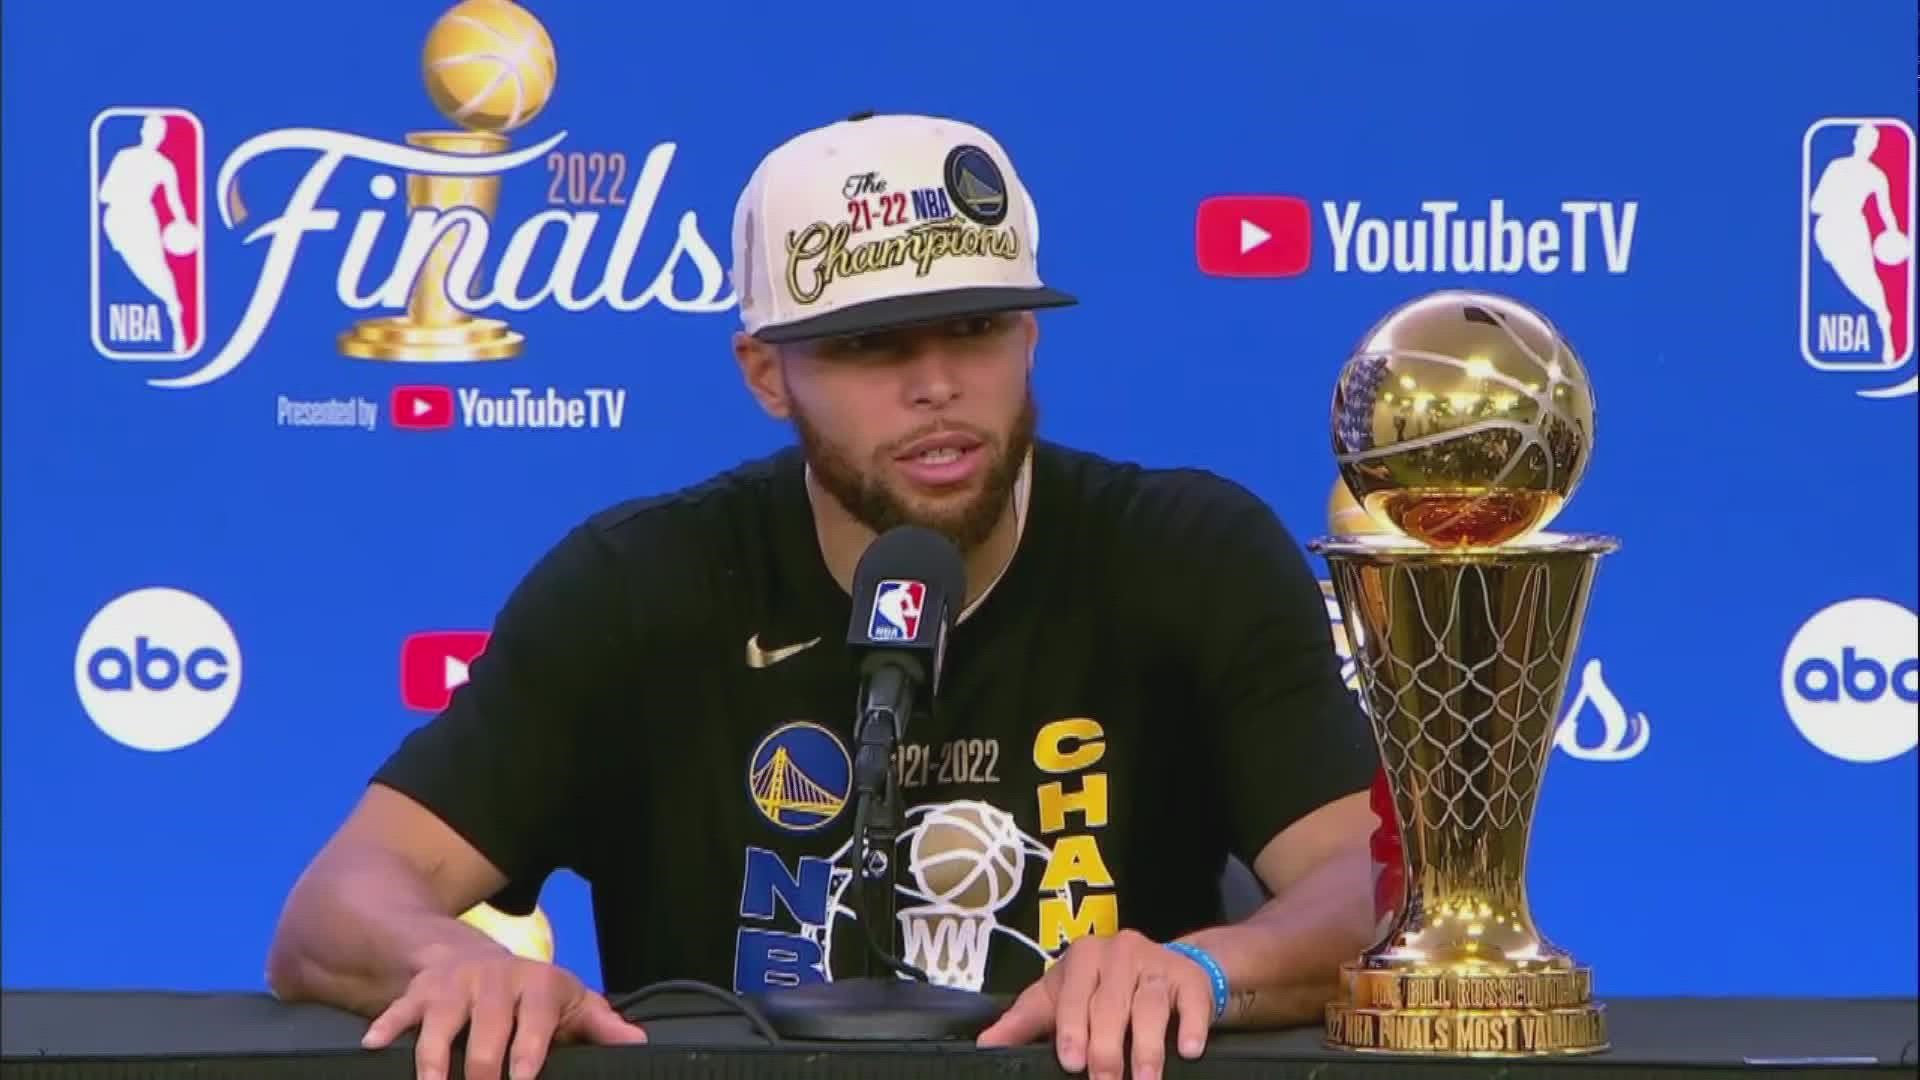 We got 4 championships' Stephen Curry hyped over 2022 NBA Finals